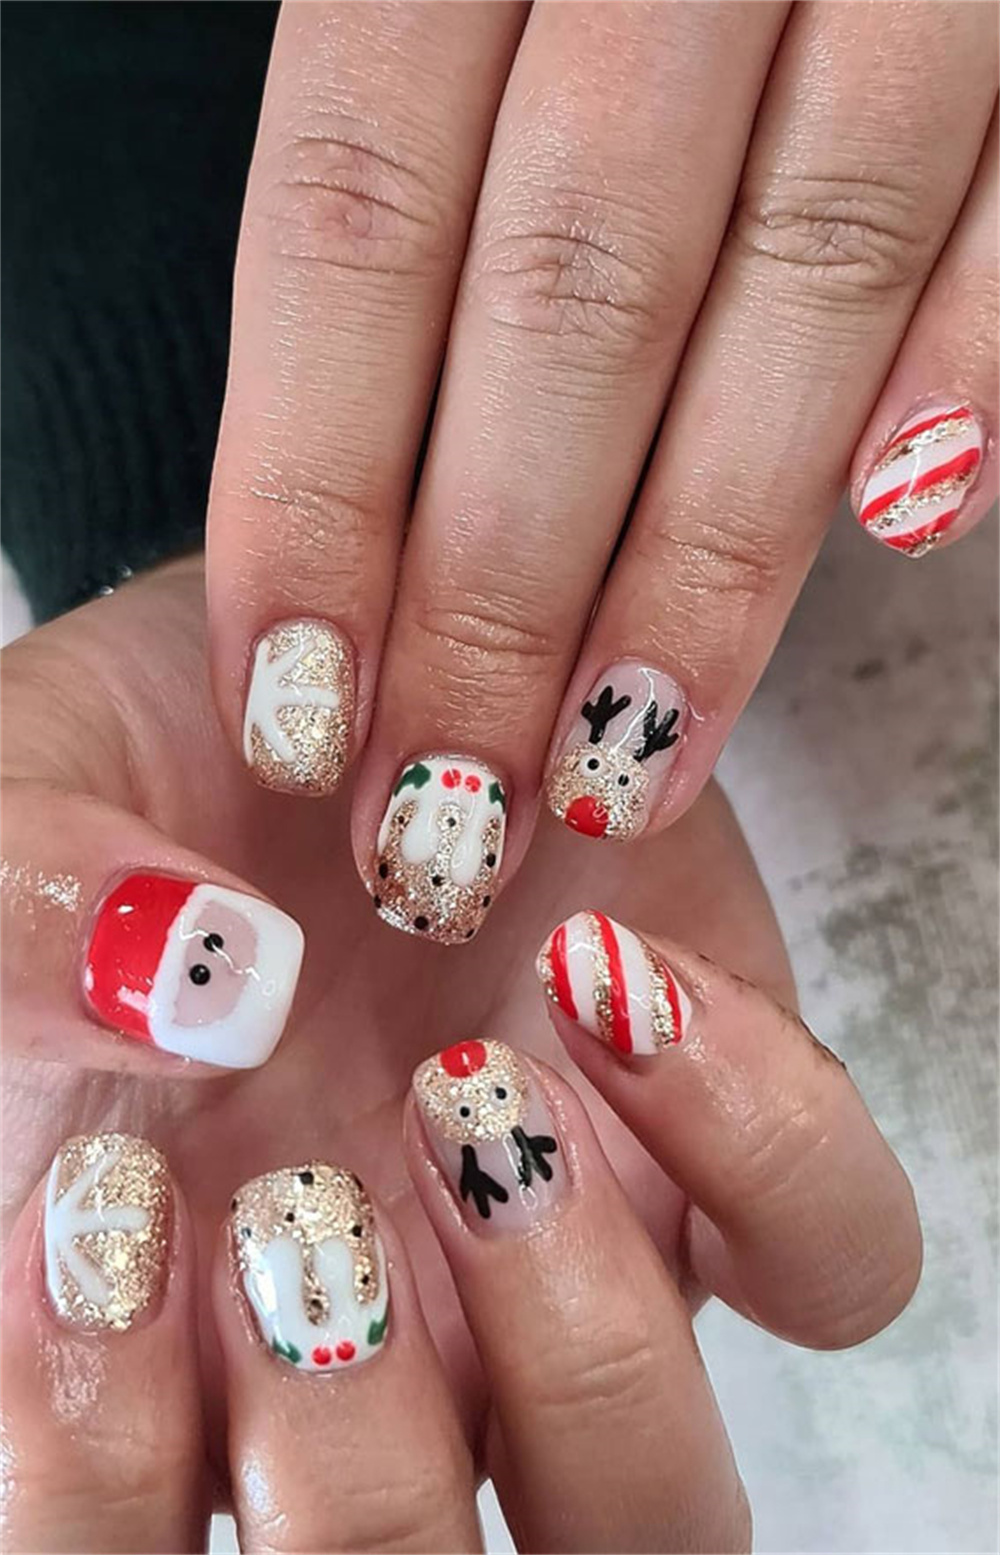 Christmas nails with golden reindeer accents